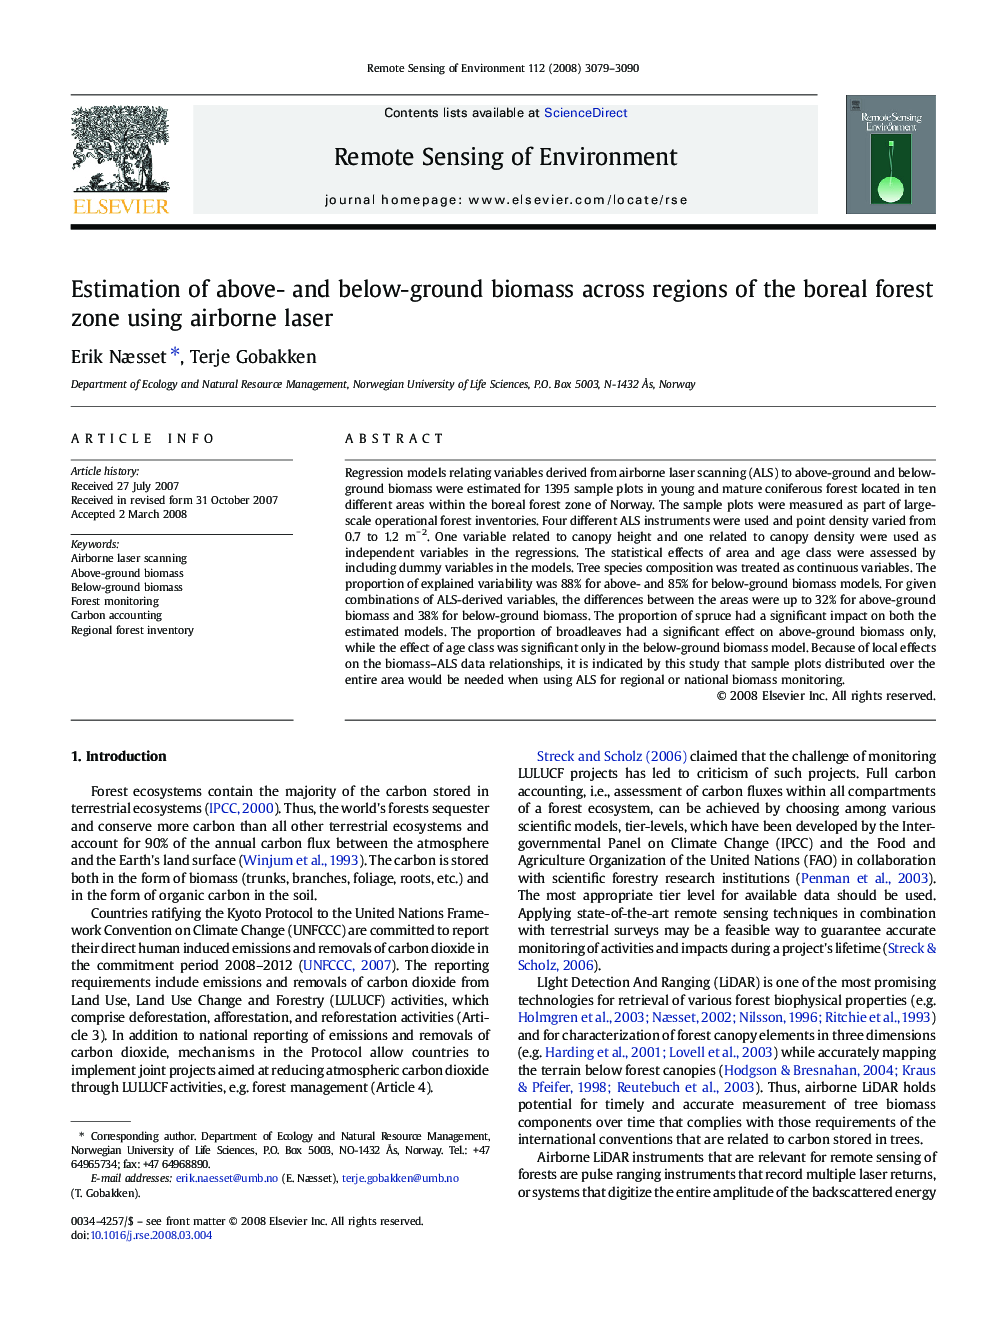 Estimation of above- and below-ground biomass across regions of the boreal forest zone using airborne laser